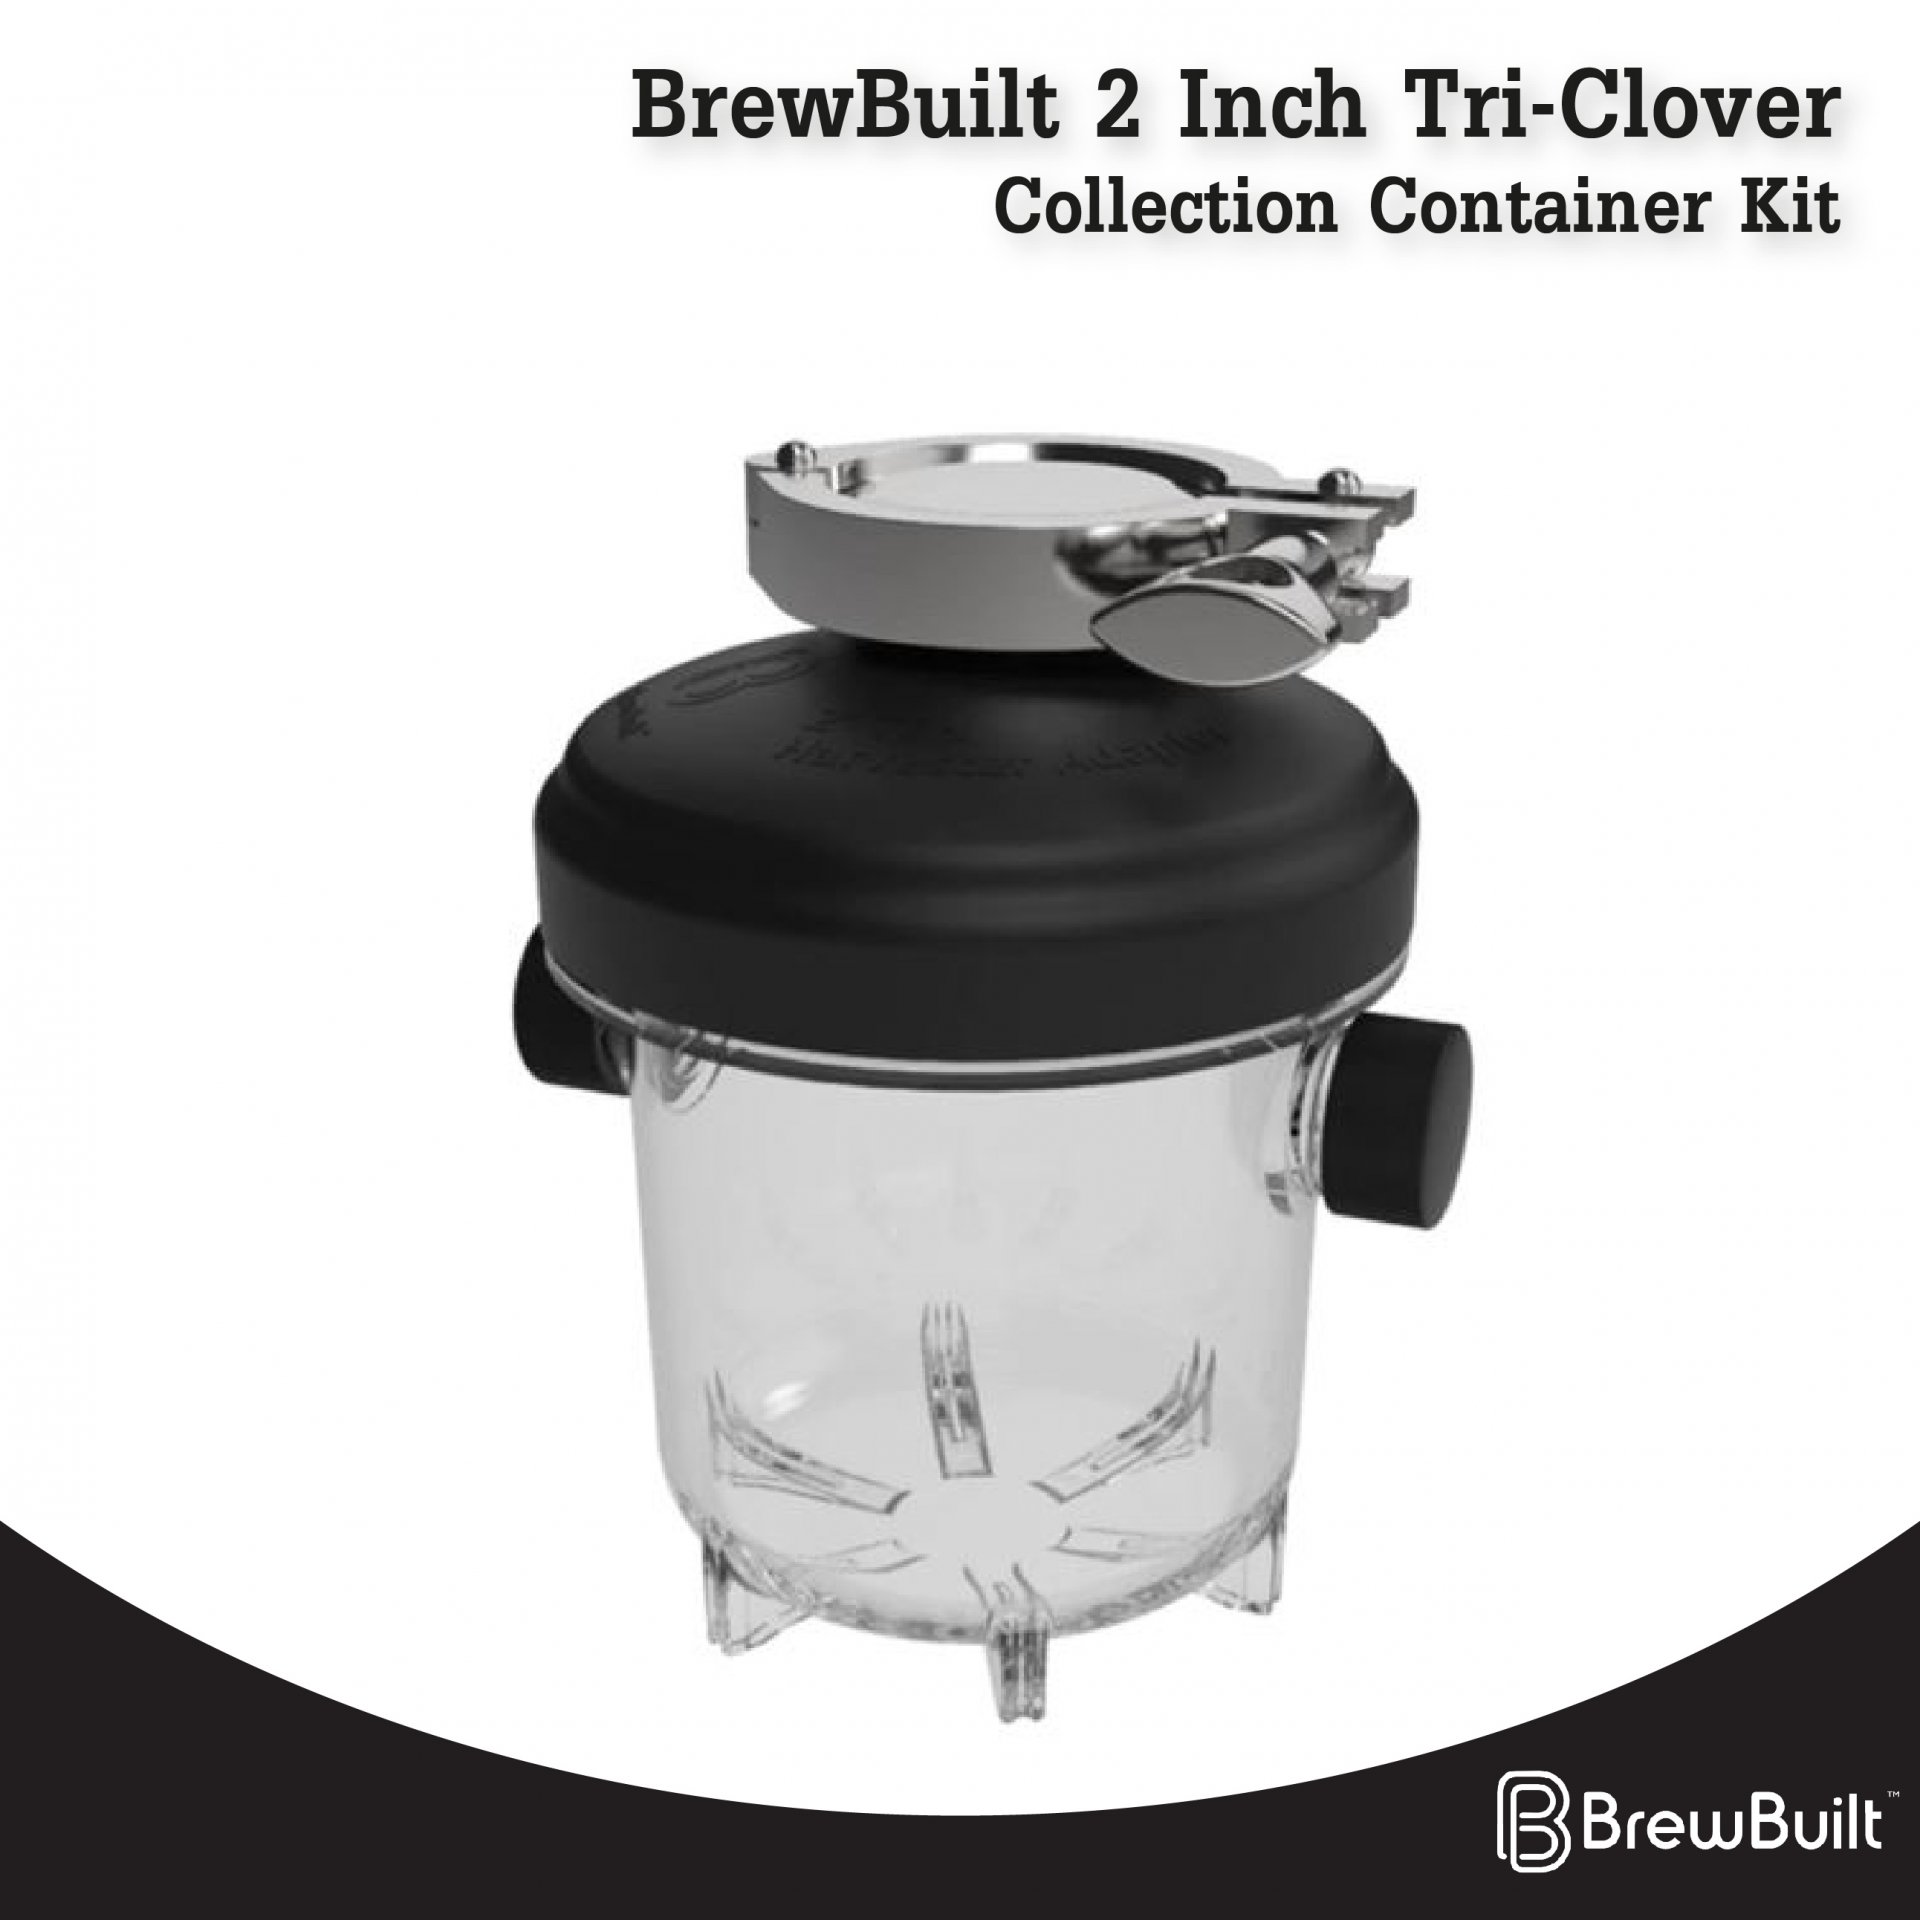 BrewBuilt 2 Inch Tri-Clover Collection Container Kit